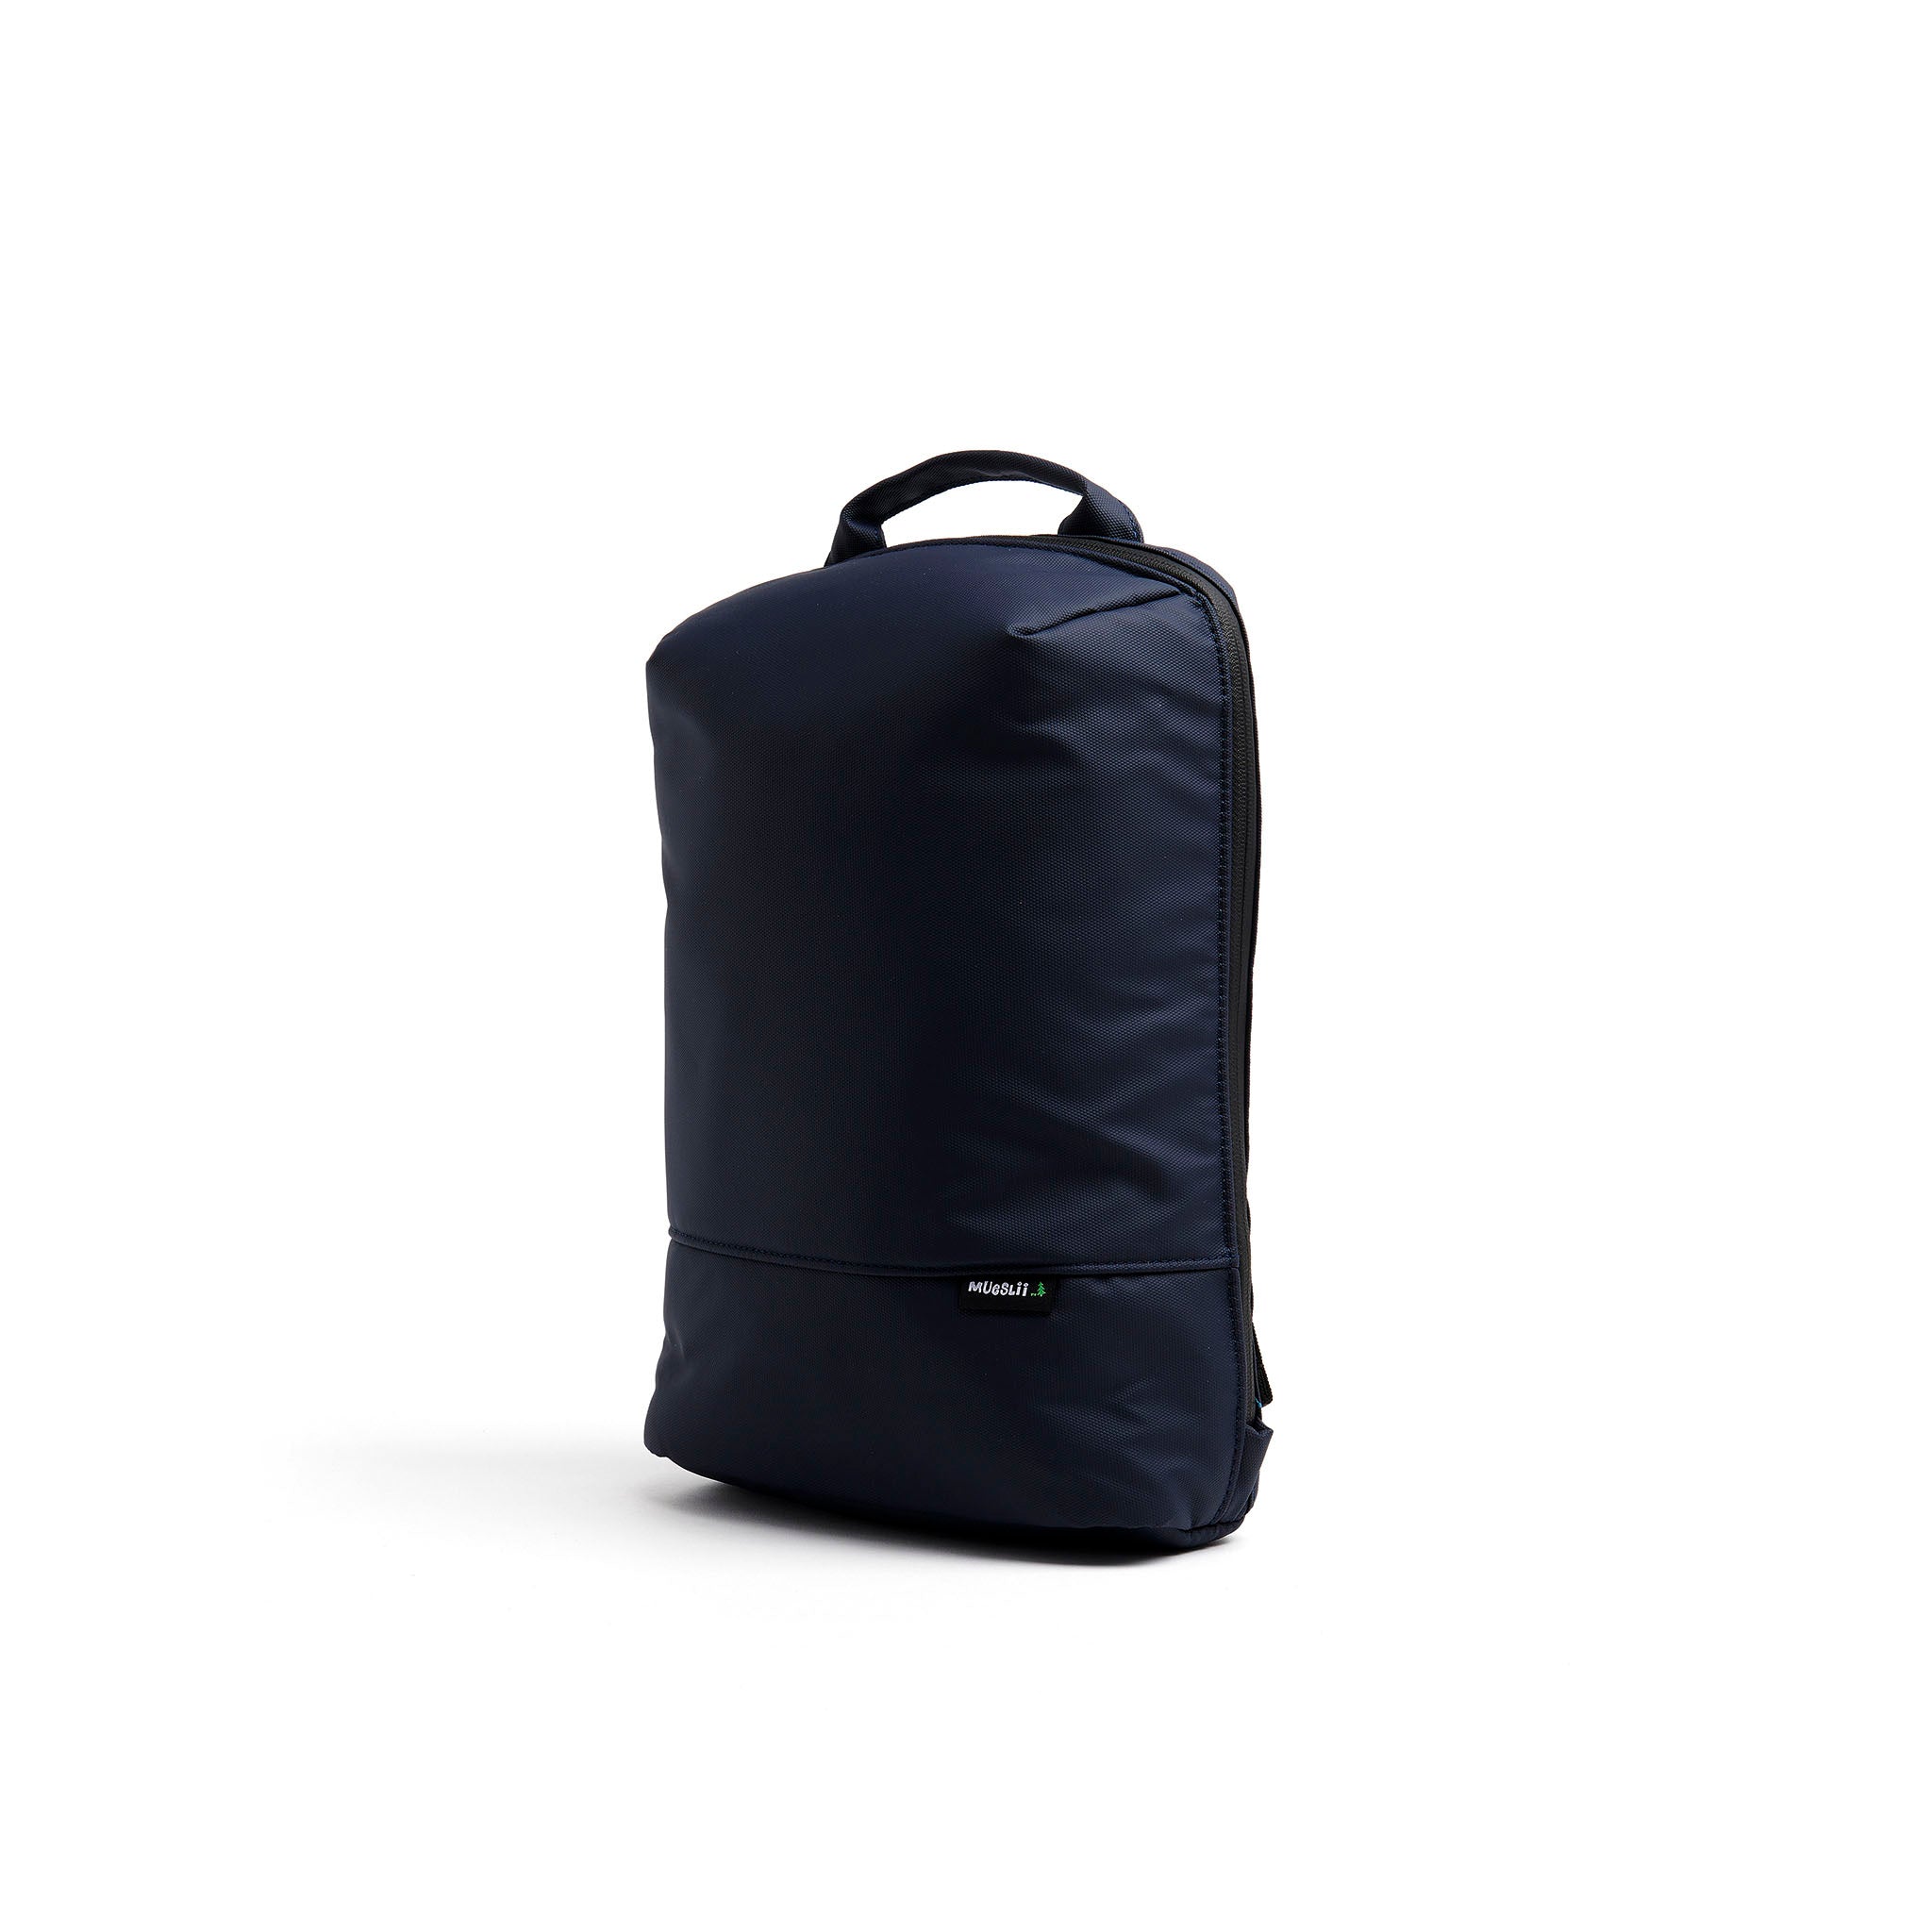 Mueslii small backpack, made of PU coated waterproof nylon, with a laptop compartment, color midnight blue, side view.